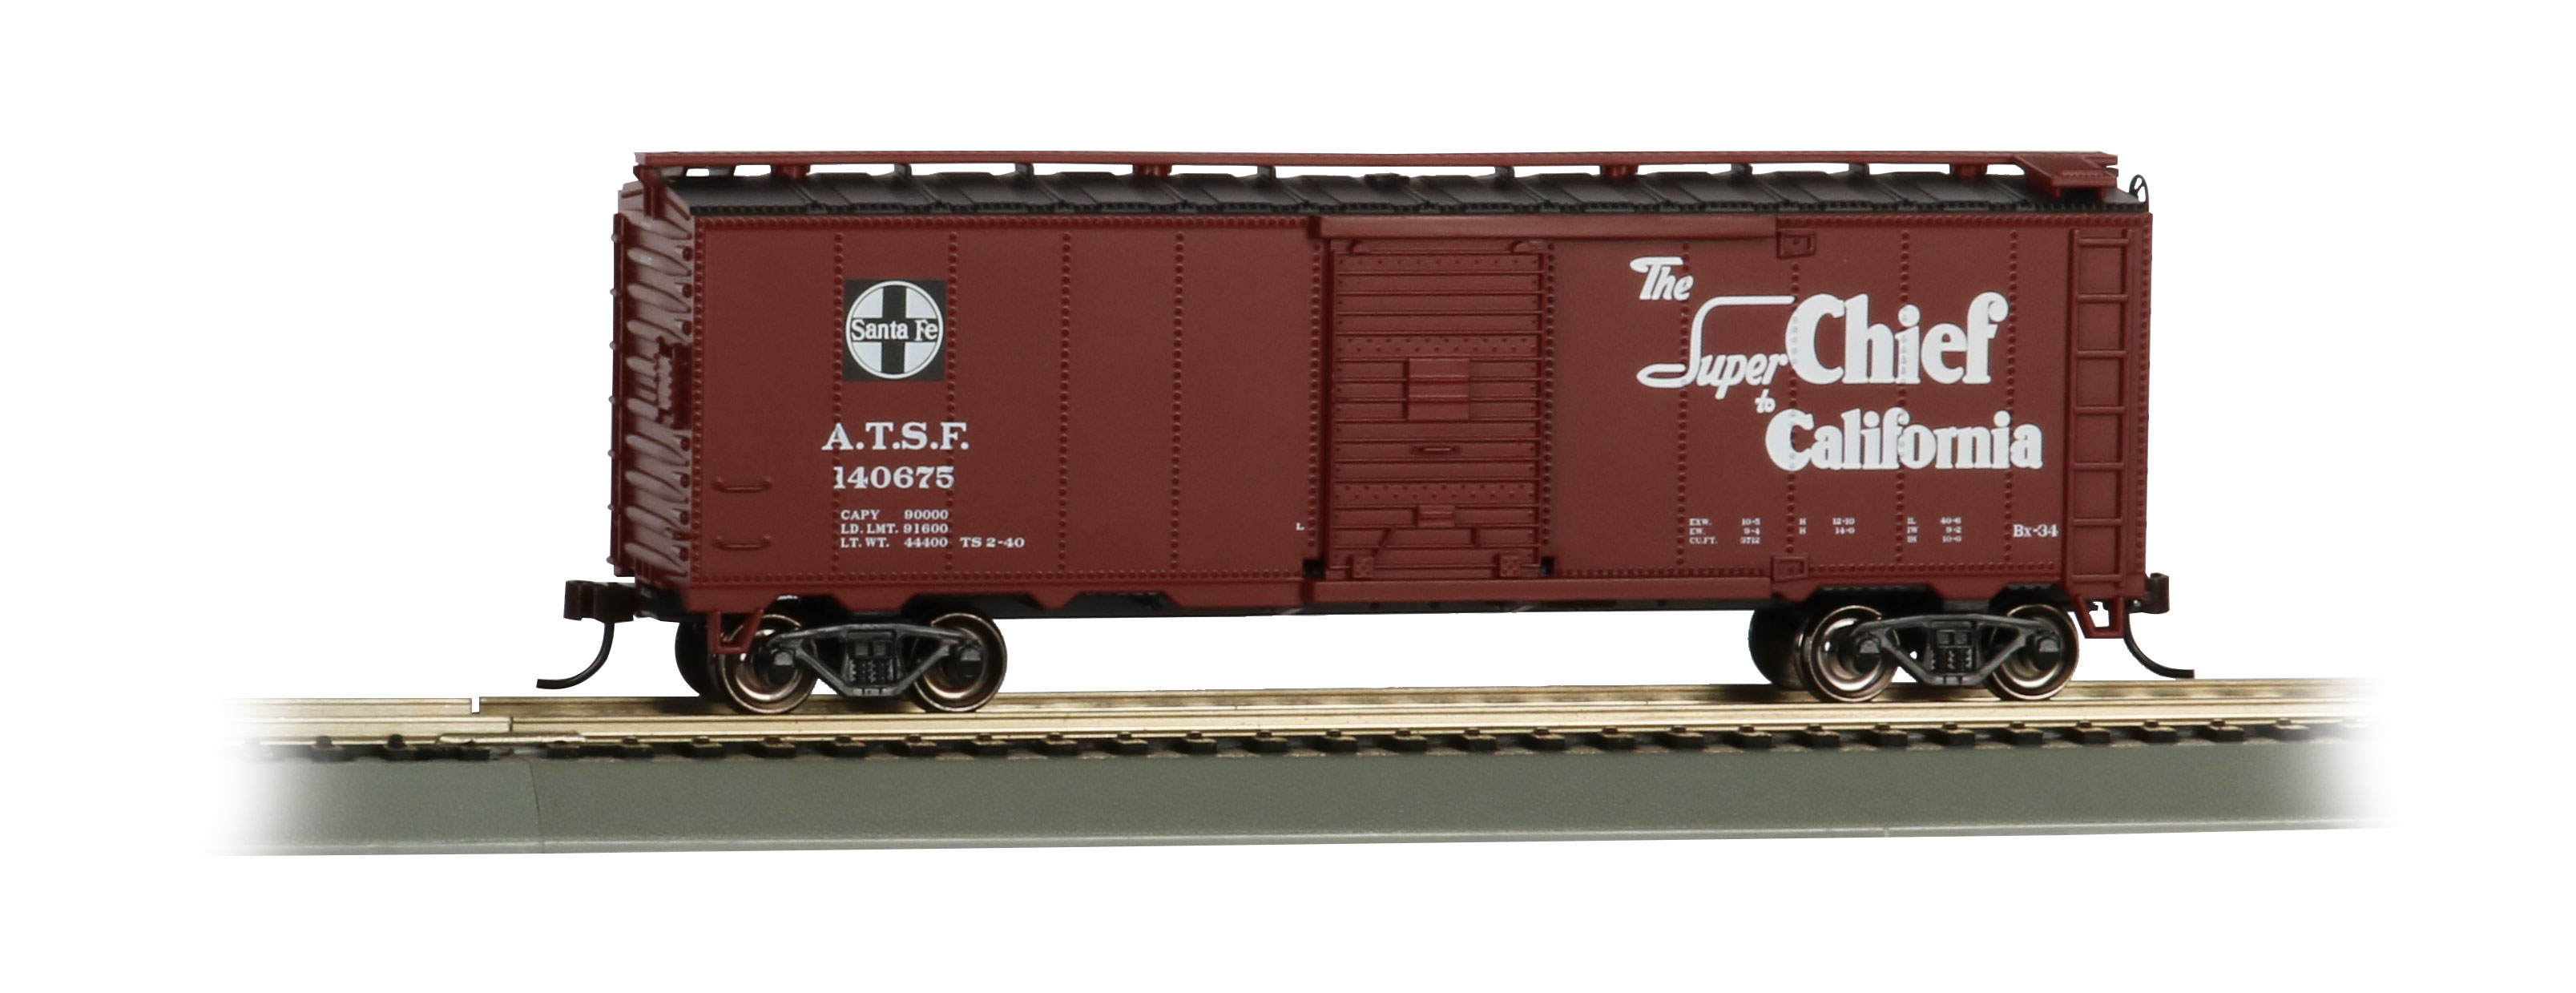 New! Beautiful Cars Great Set Details about   Accurail Set of 2 HO 50’ Boxcars Santa Fe 